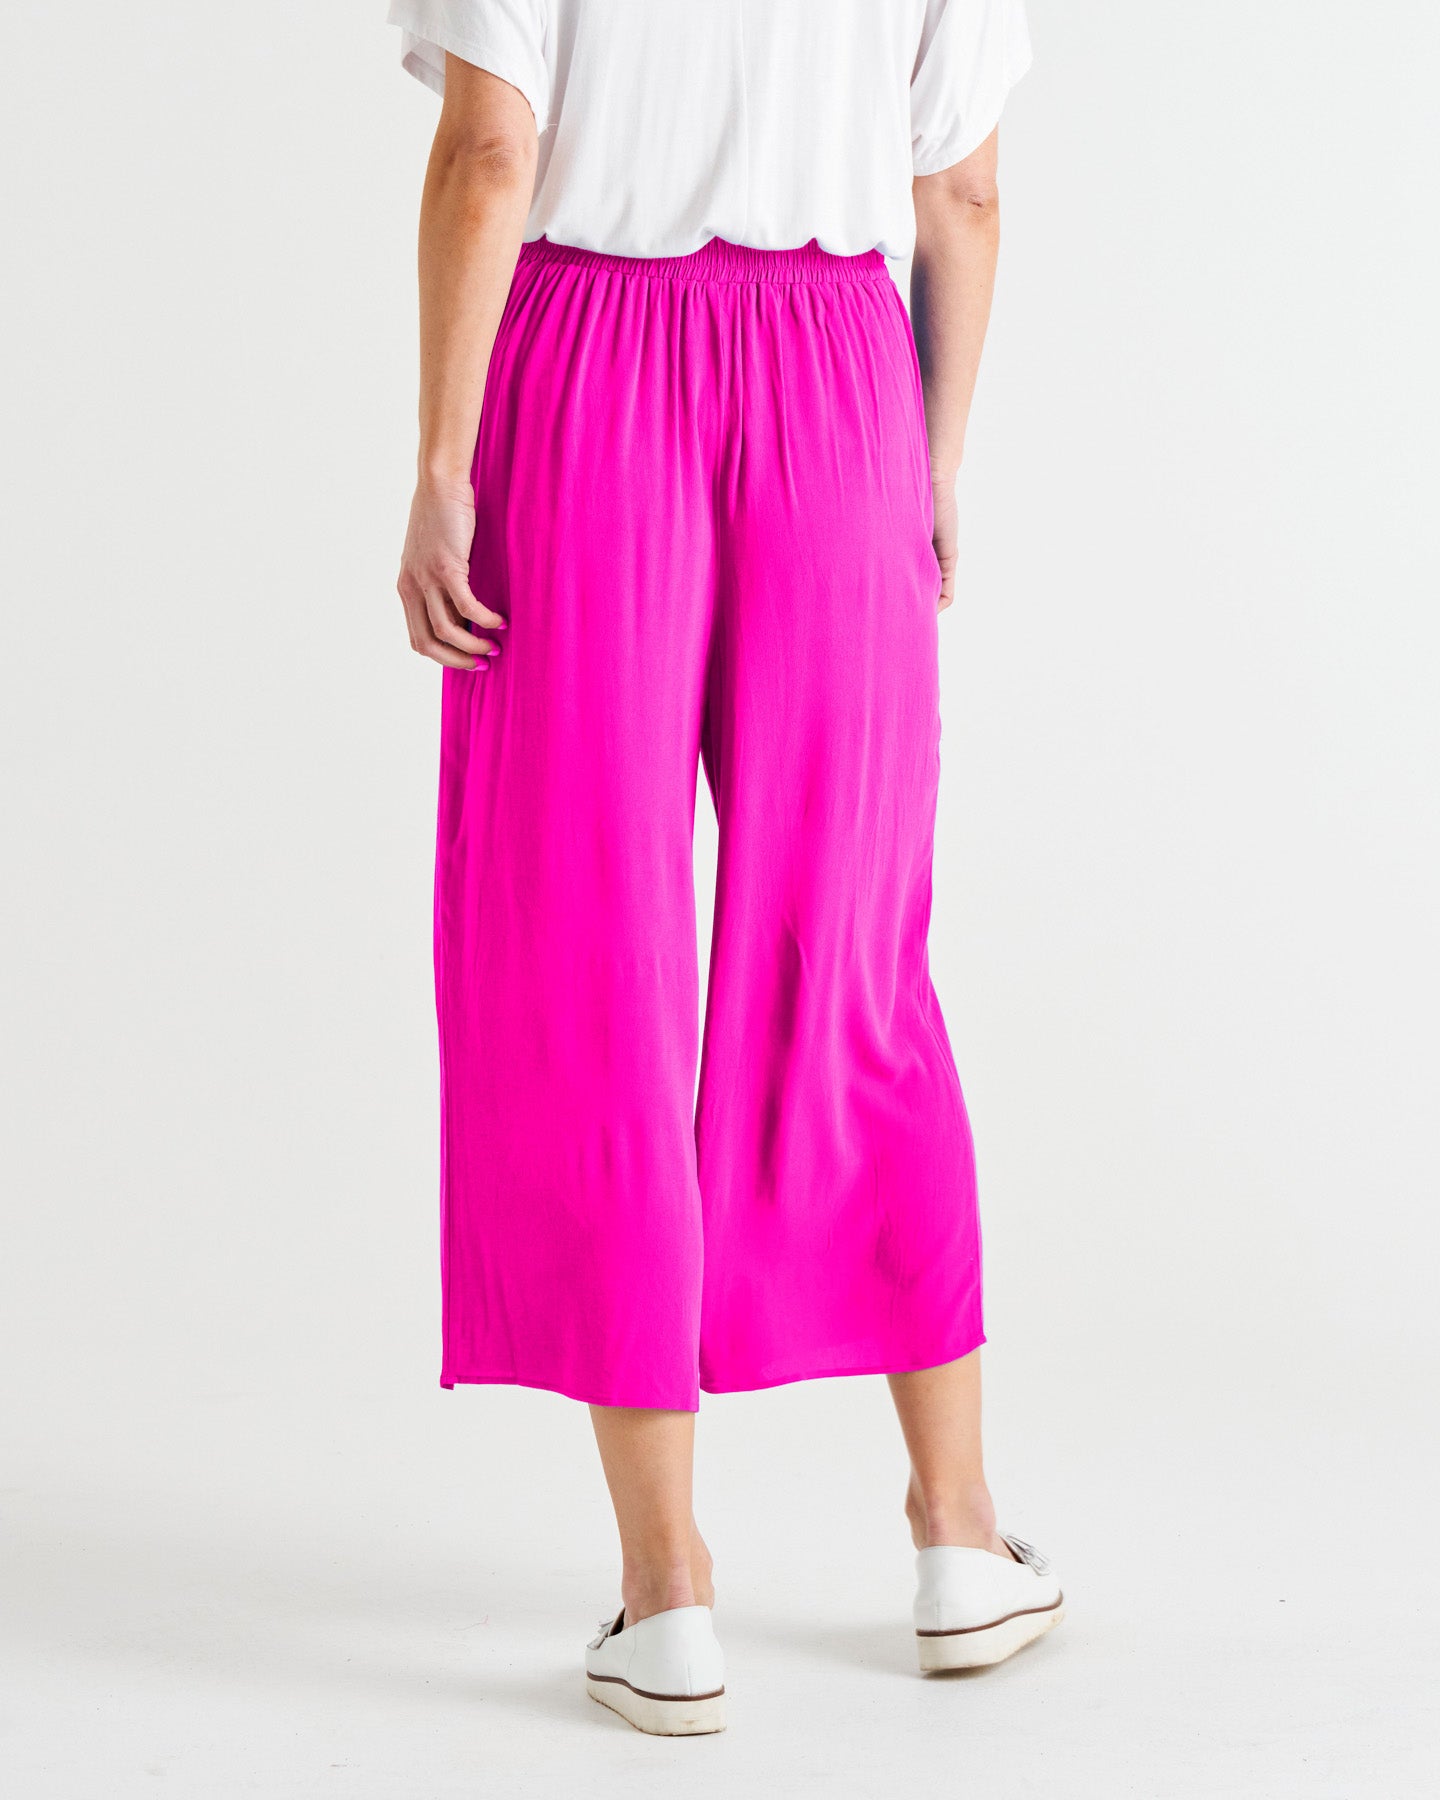 Olympia Pant - French Rose